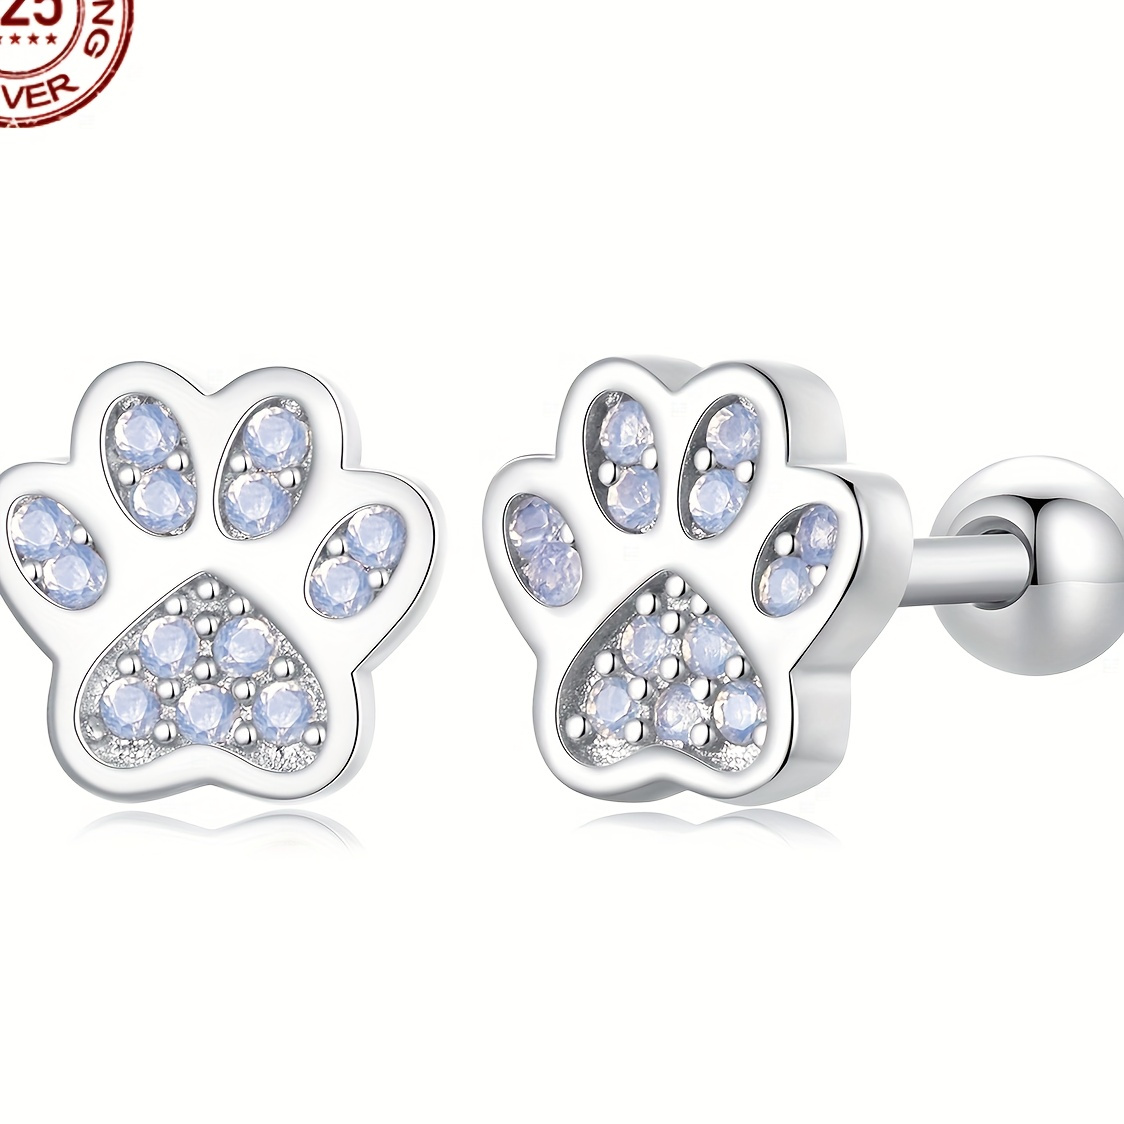 

925 Sterling Silver Paw Print Earrings, Boho Style, Elegant And Delicate, High-quality Women's Jewelry Gift Without Power Supply